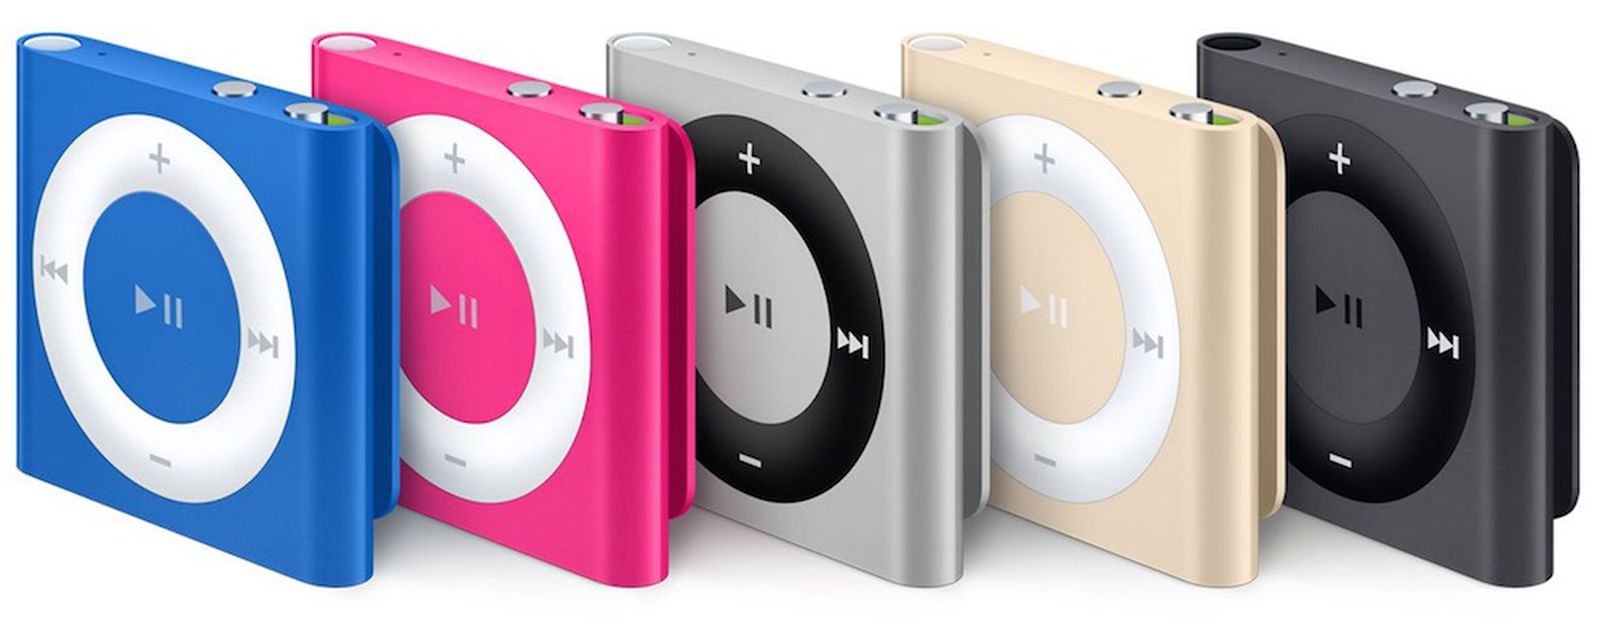 iPod Apple's Cheapest iPod, Now Discontinued